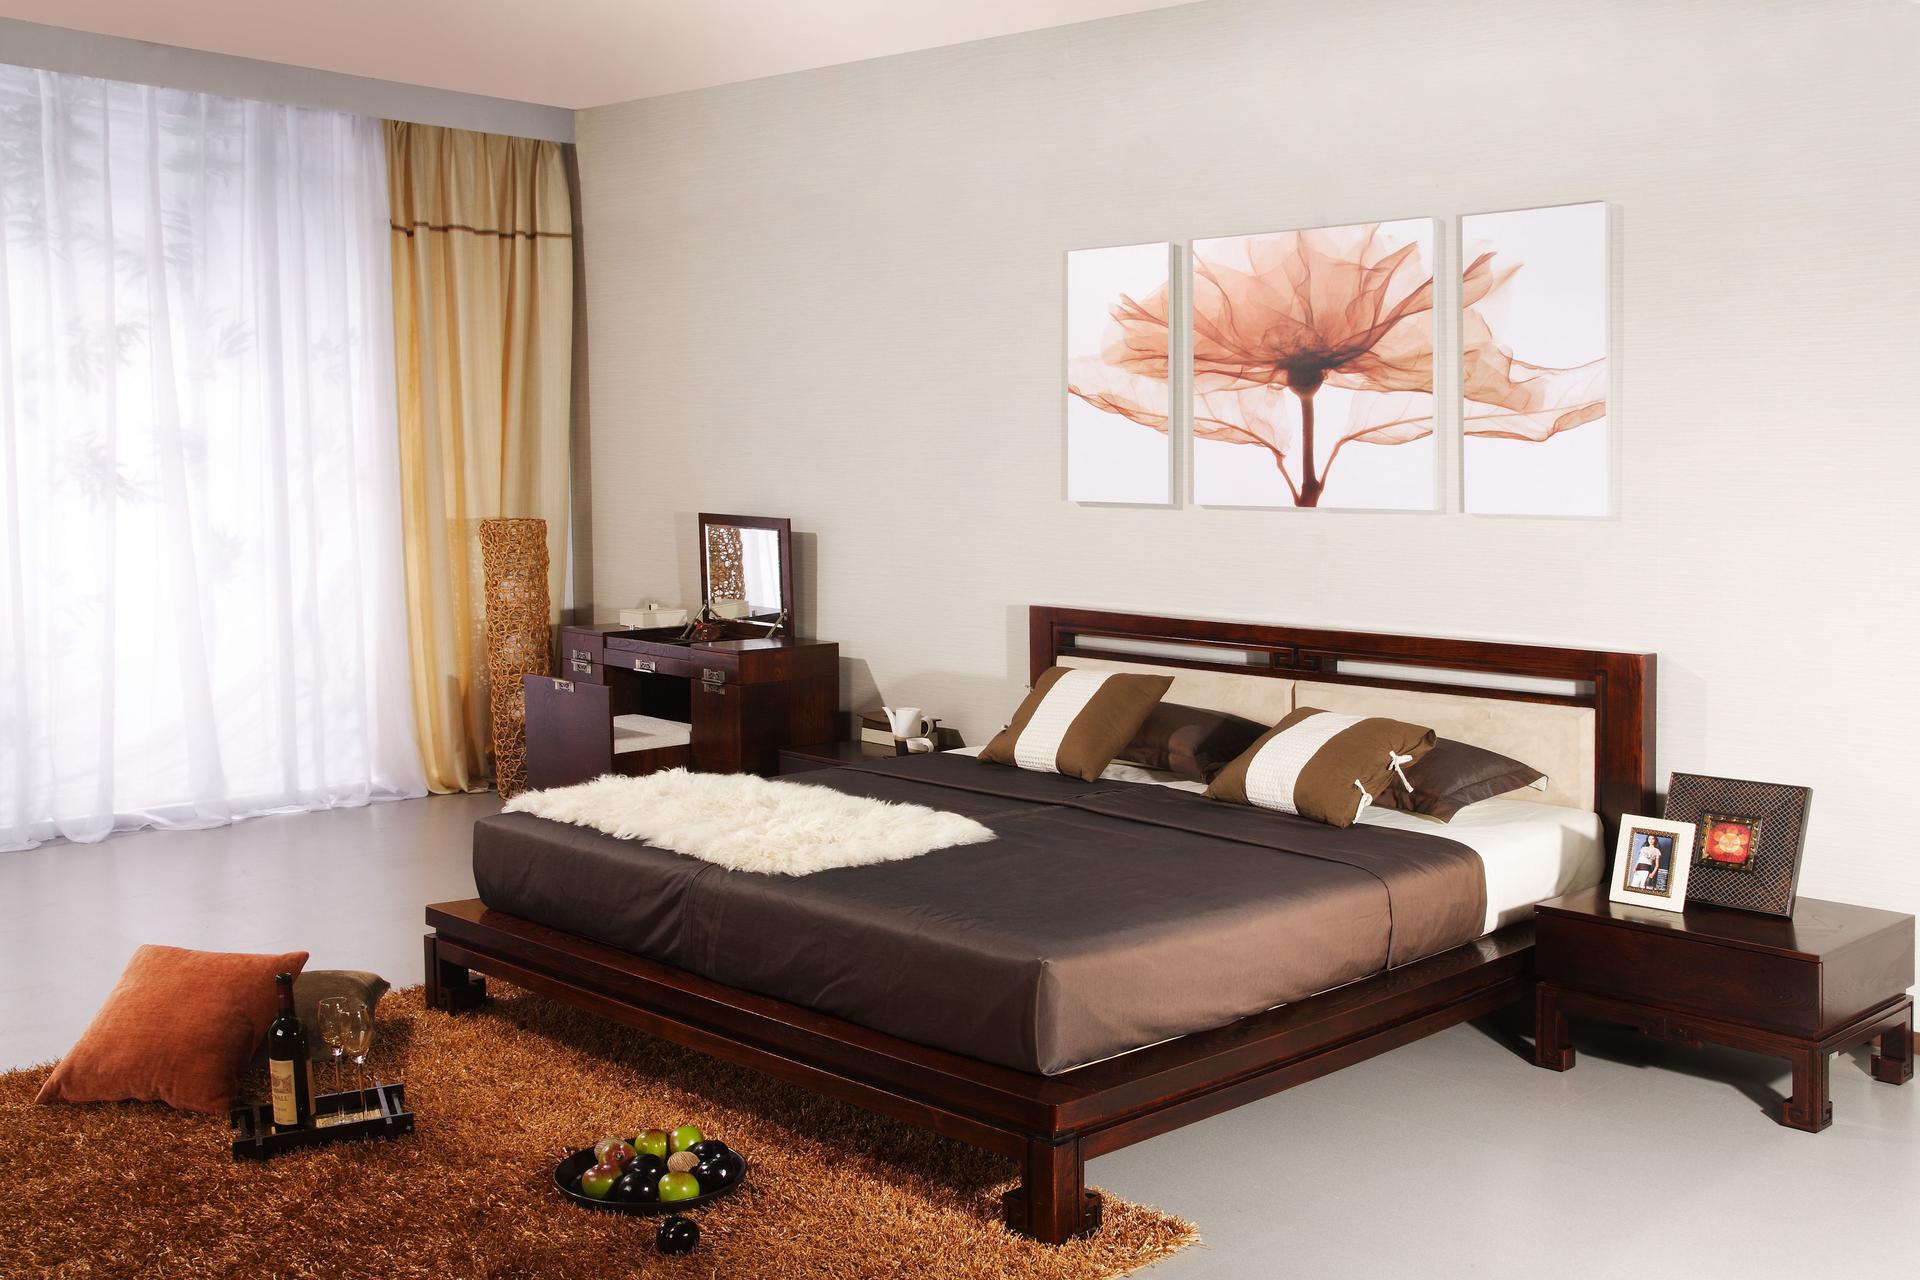 Kokoon Beds and Bedding can custom-make mattresses and suggest stylish accessories.